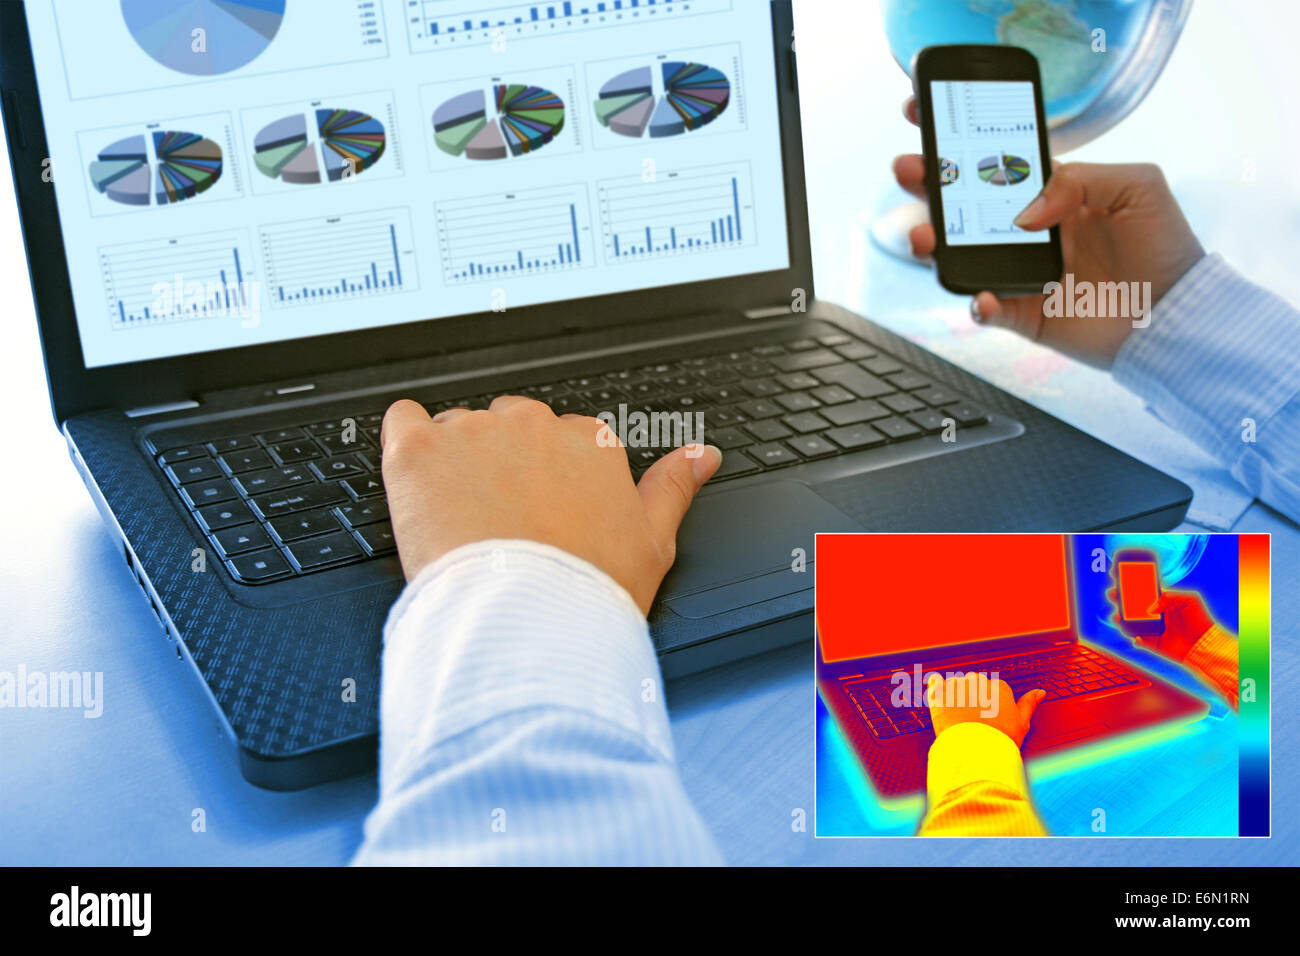 Infrared thermography image showing the heat and radiation of Notebook and smartphones in the office Stock Photo